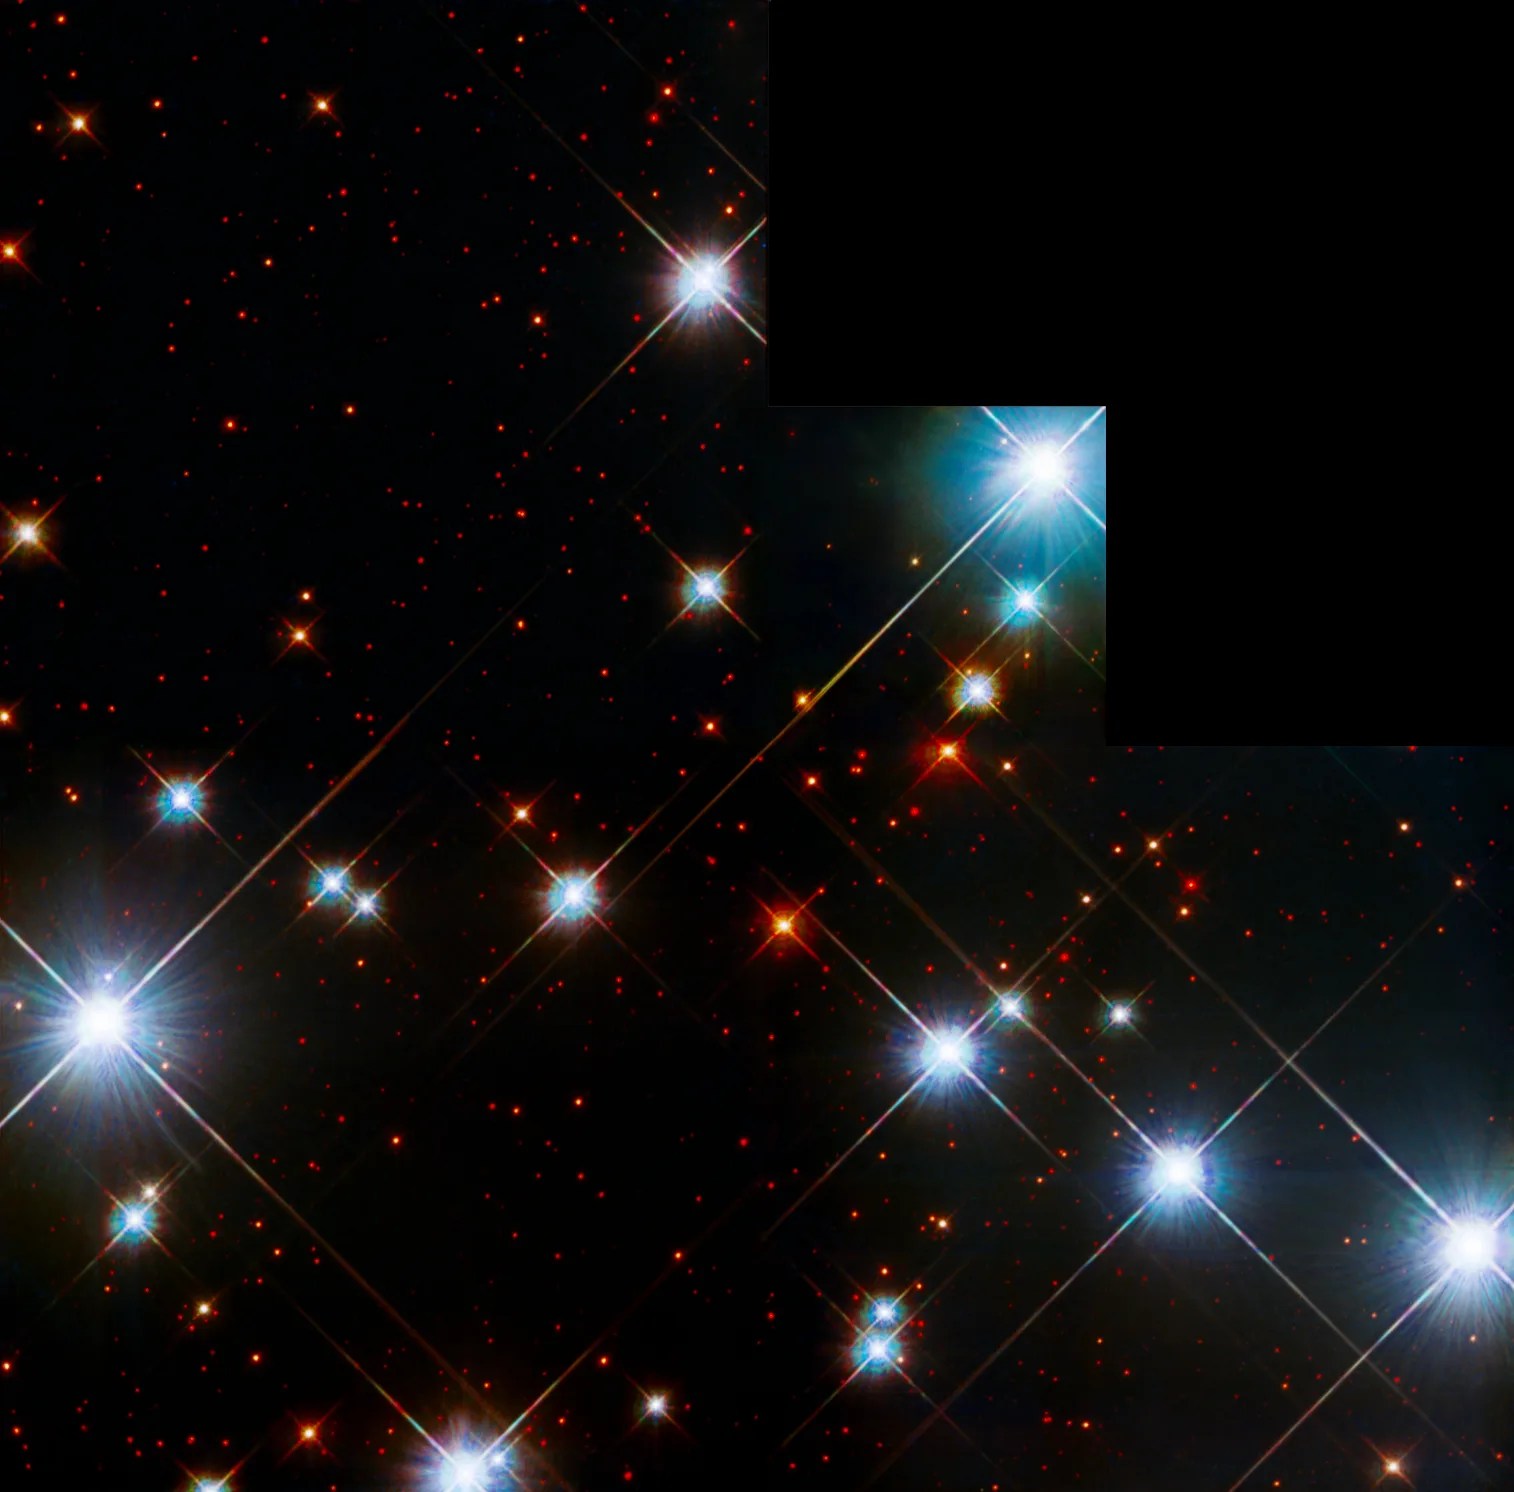 Several bright stars in colors of blue-white and red against the black background of space.